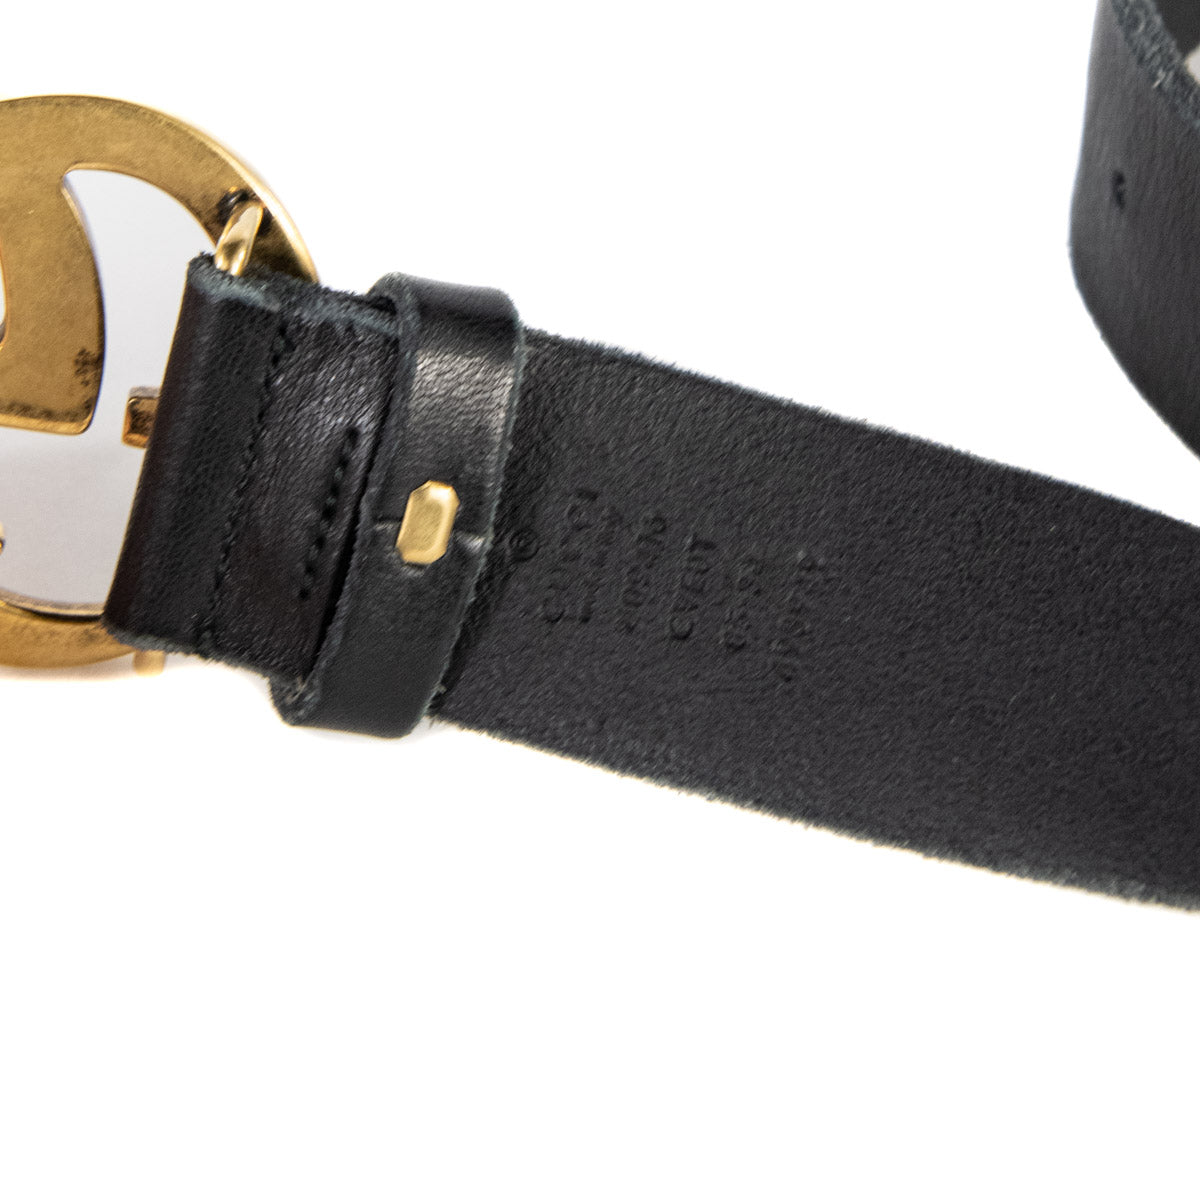 Gucci Black Leather GG Marmont Belt 